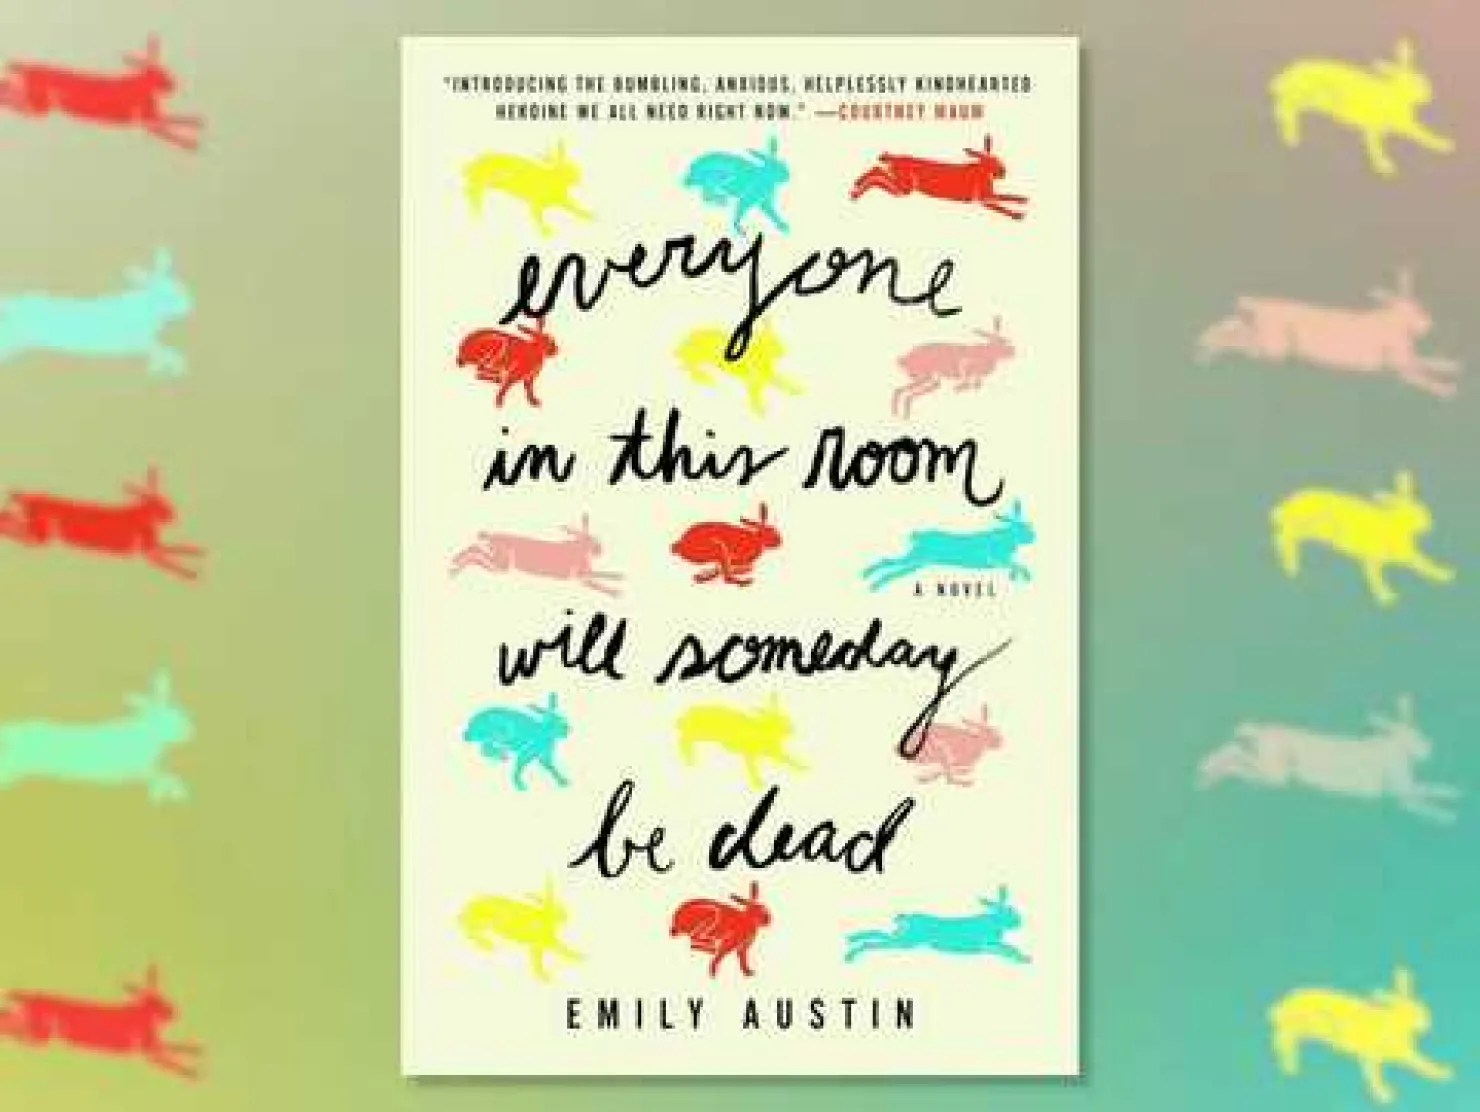 Everyone in This Room Will Someday Be Dead by Emily R. Austin